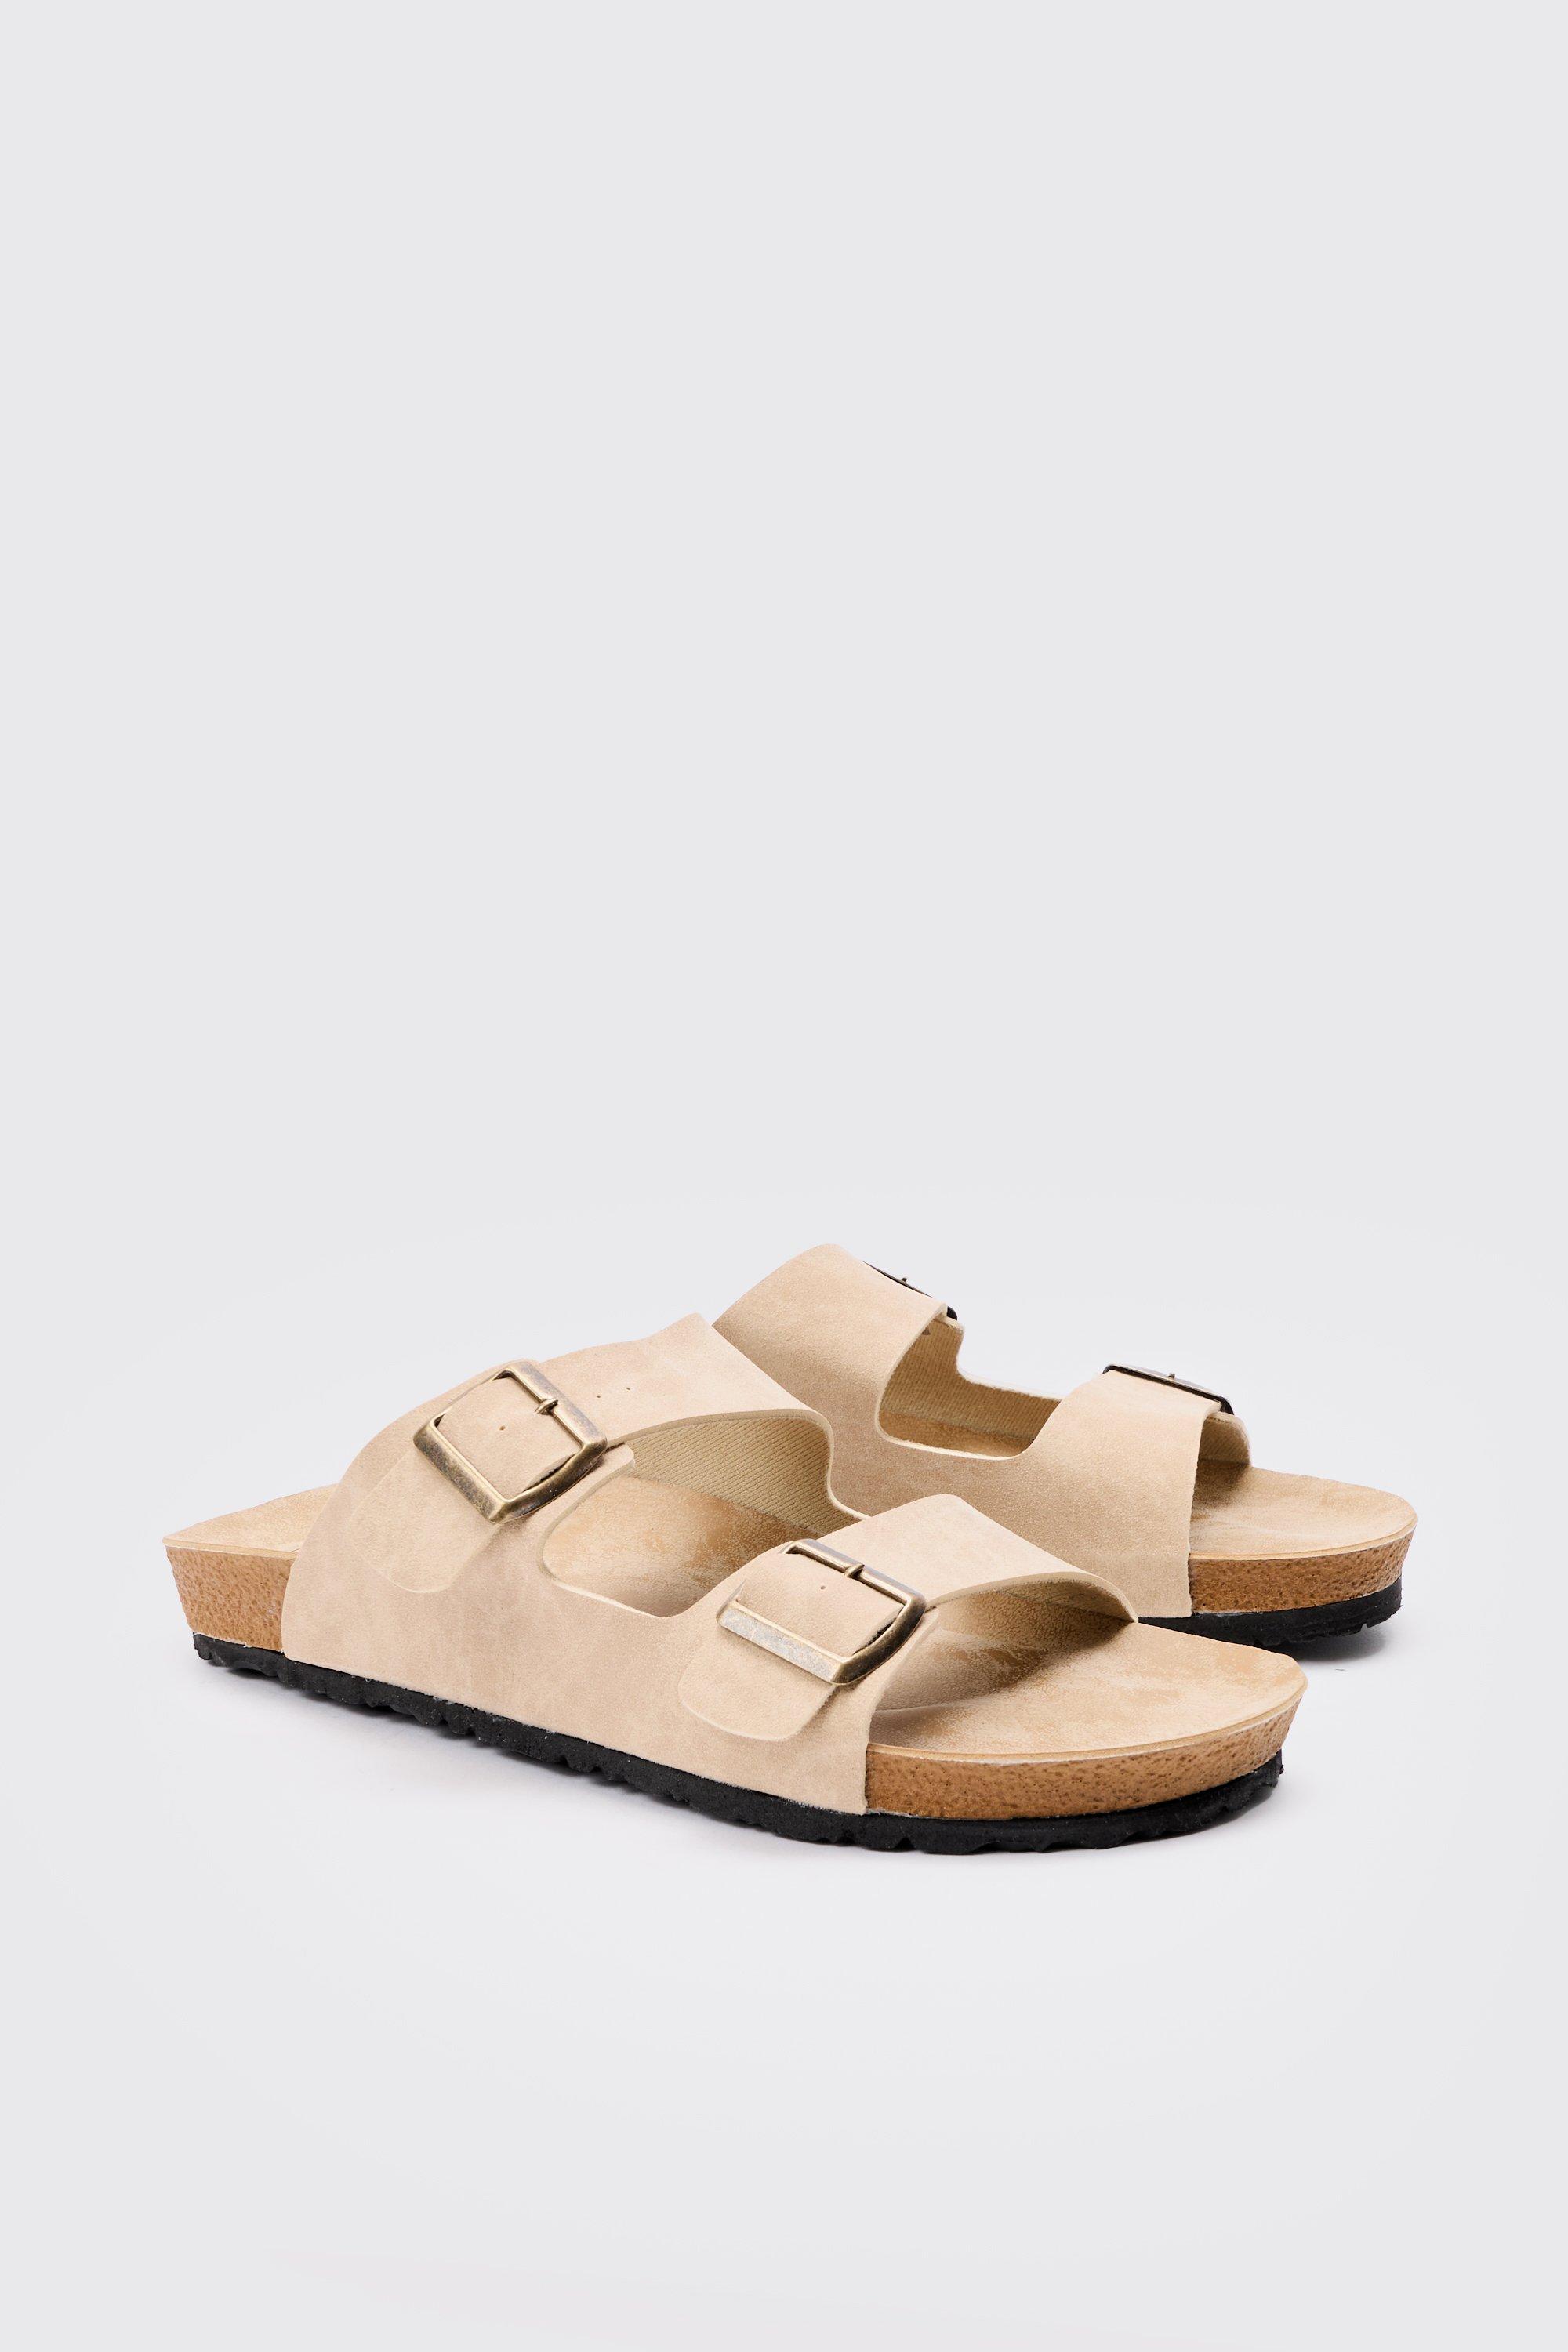 Image of Faux Suede Double Buckle Sandals In Taupe, Beige